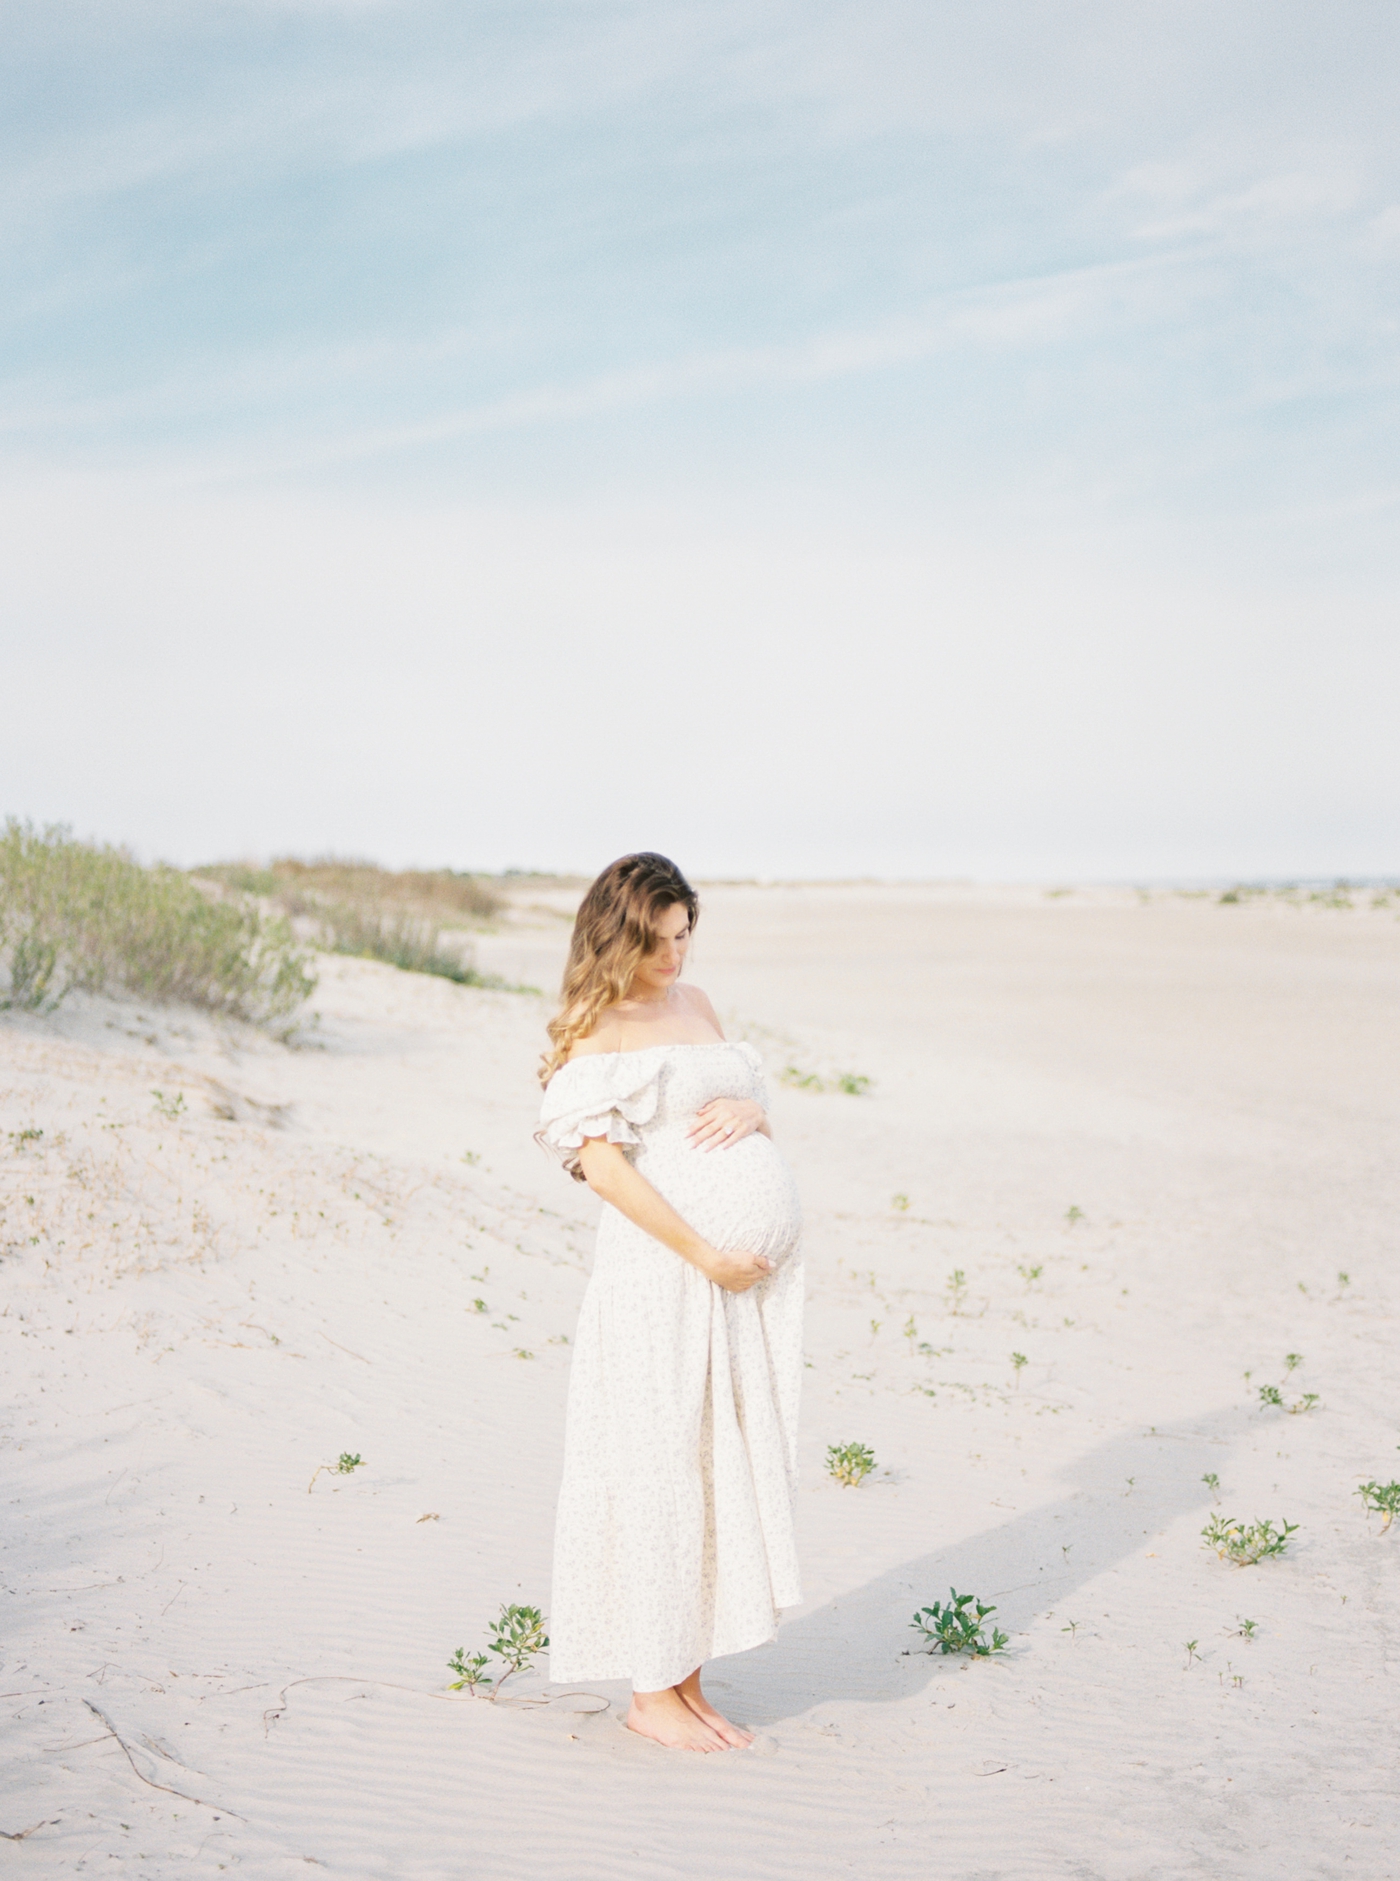 Film Photo of Pregnant woman on the beach | Photo by Caitlyn Motycka Photography.